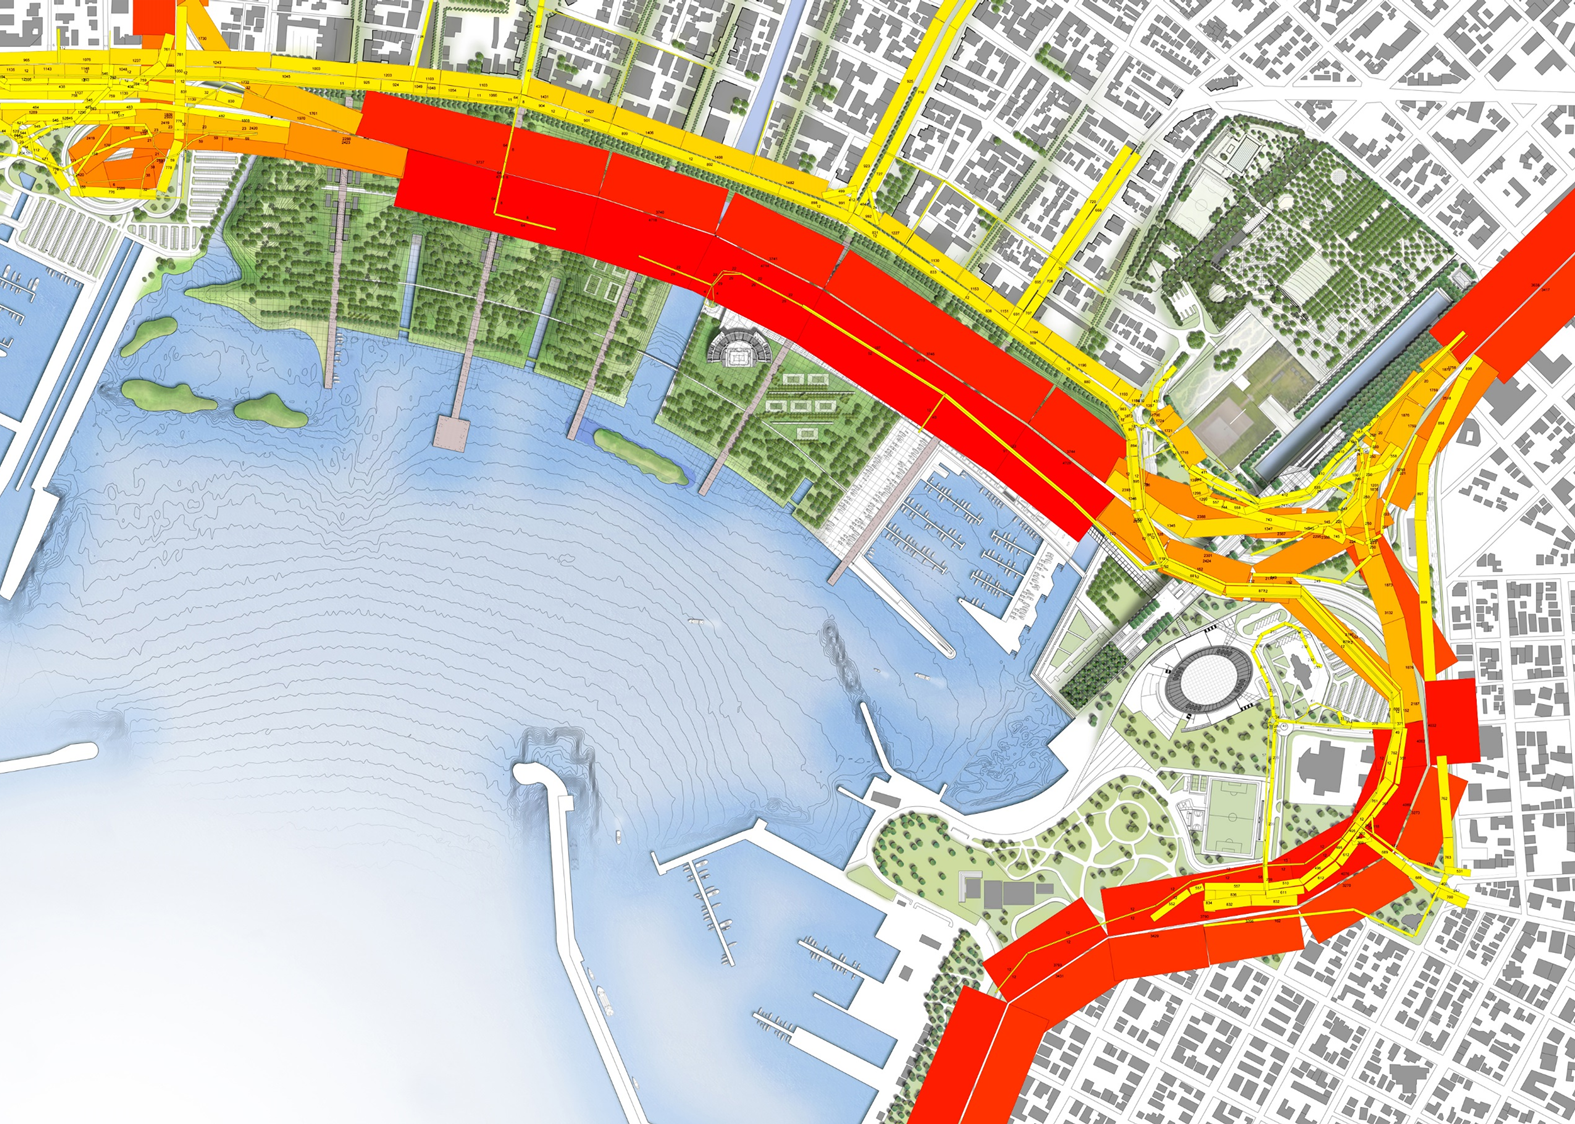 Systematica-Athens Waterfront Regeneration-Vehicular Traffic Flow